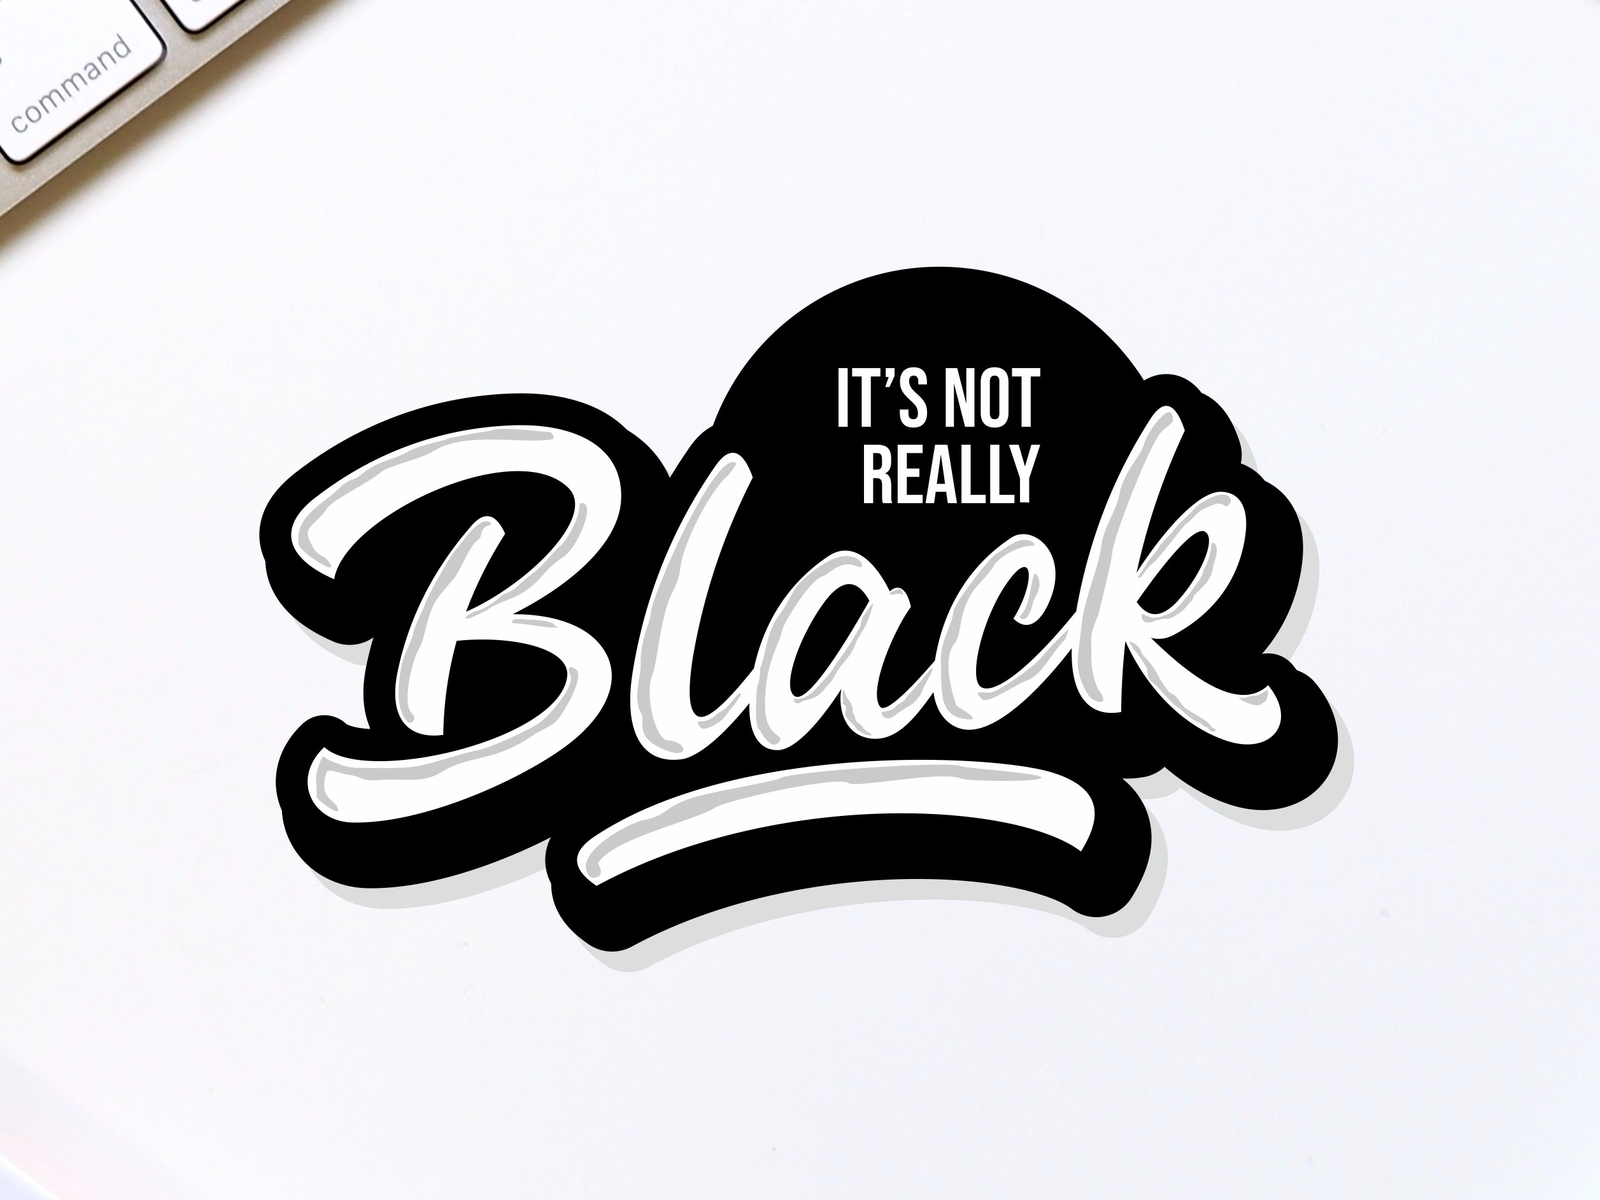 It's Not Really Black by Rachmandhap on Dribbble